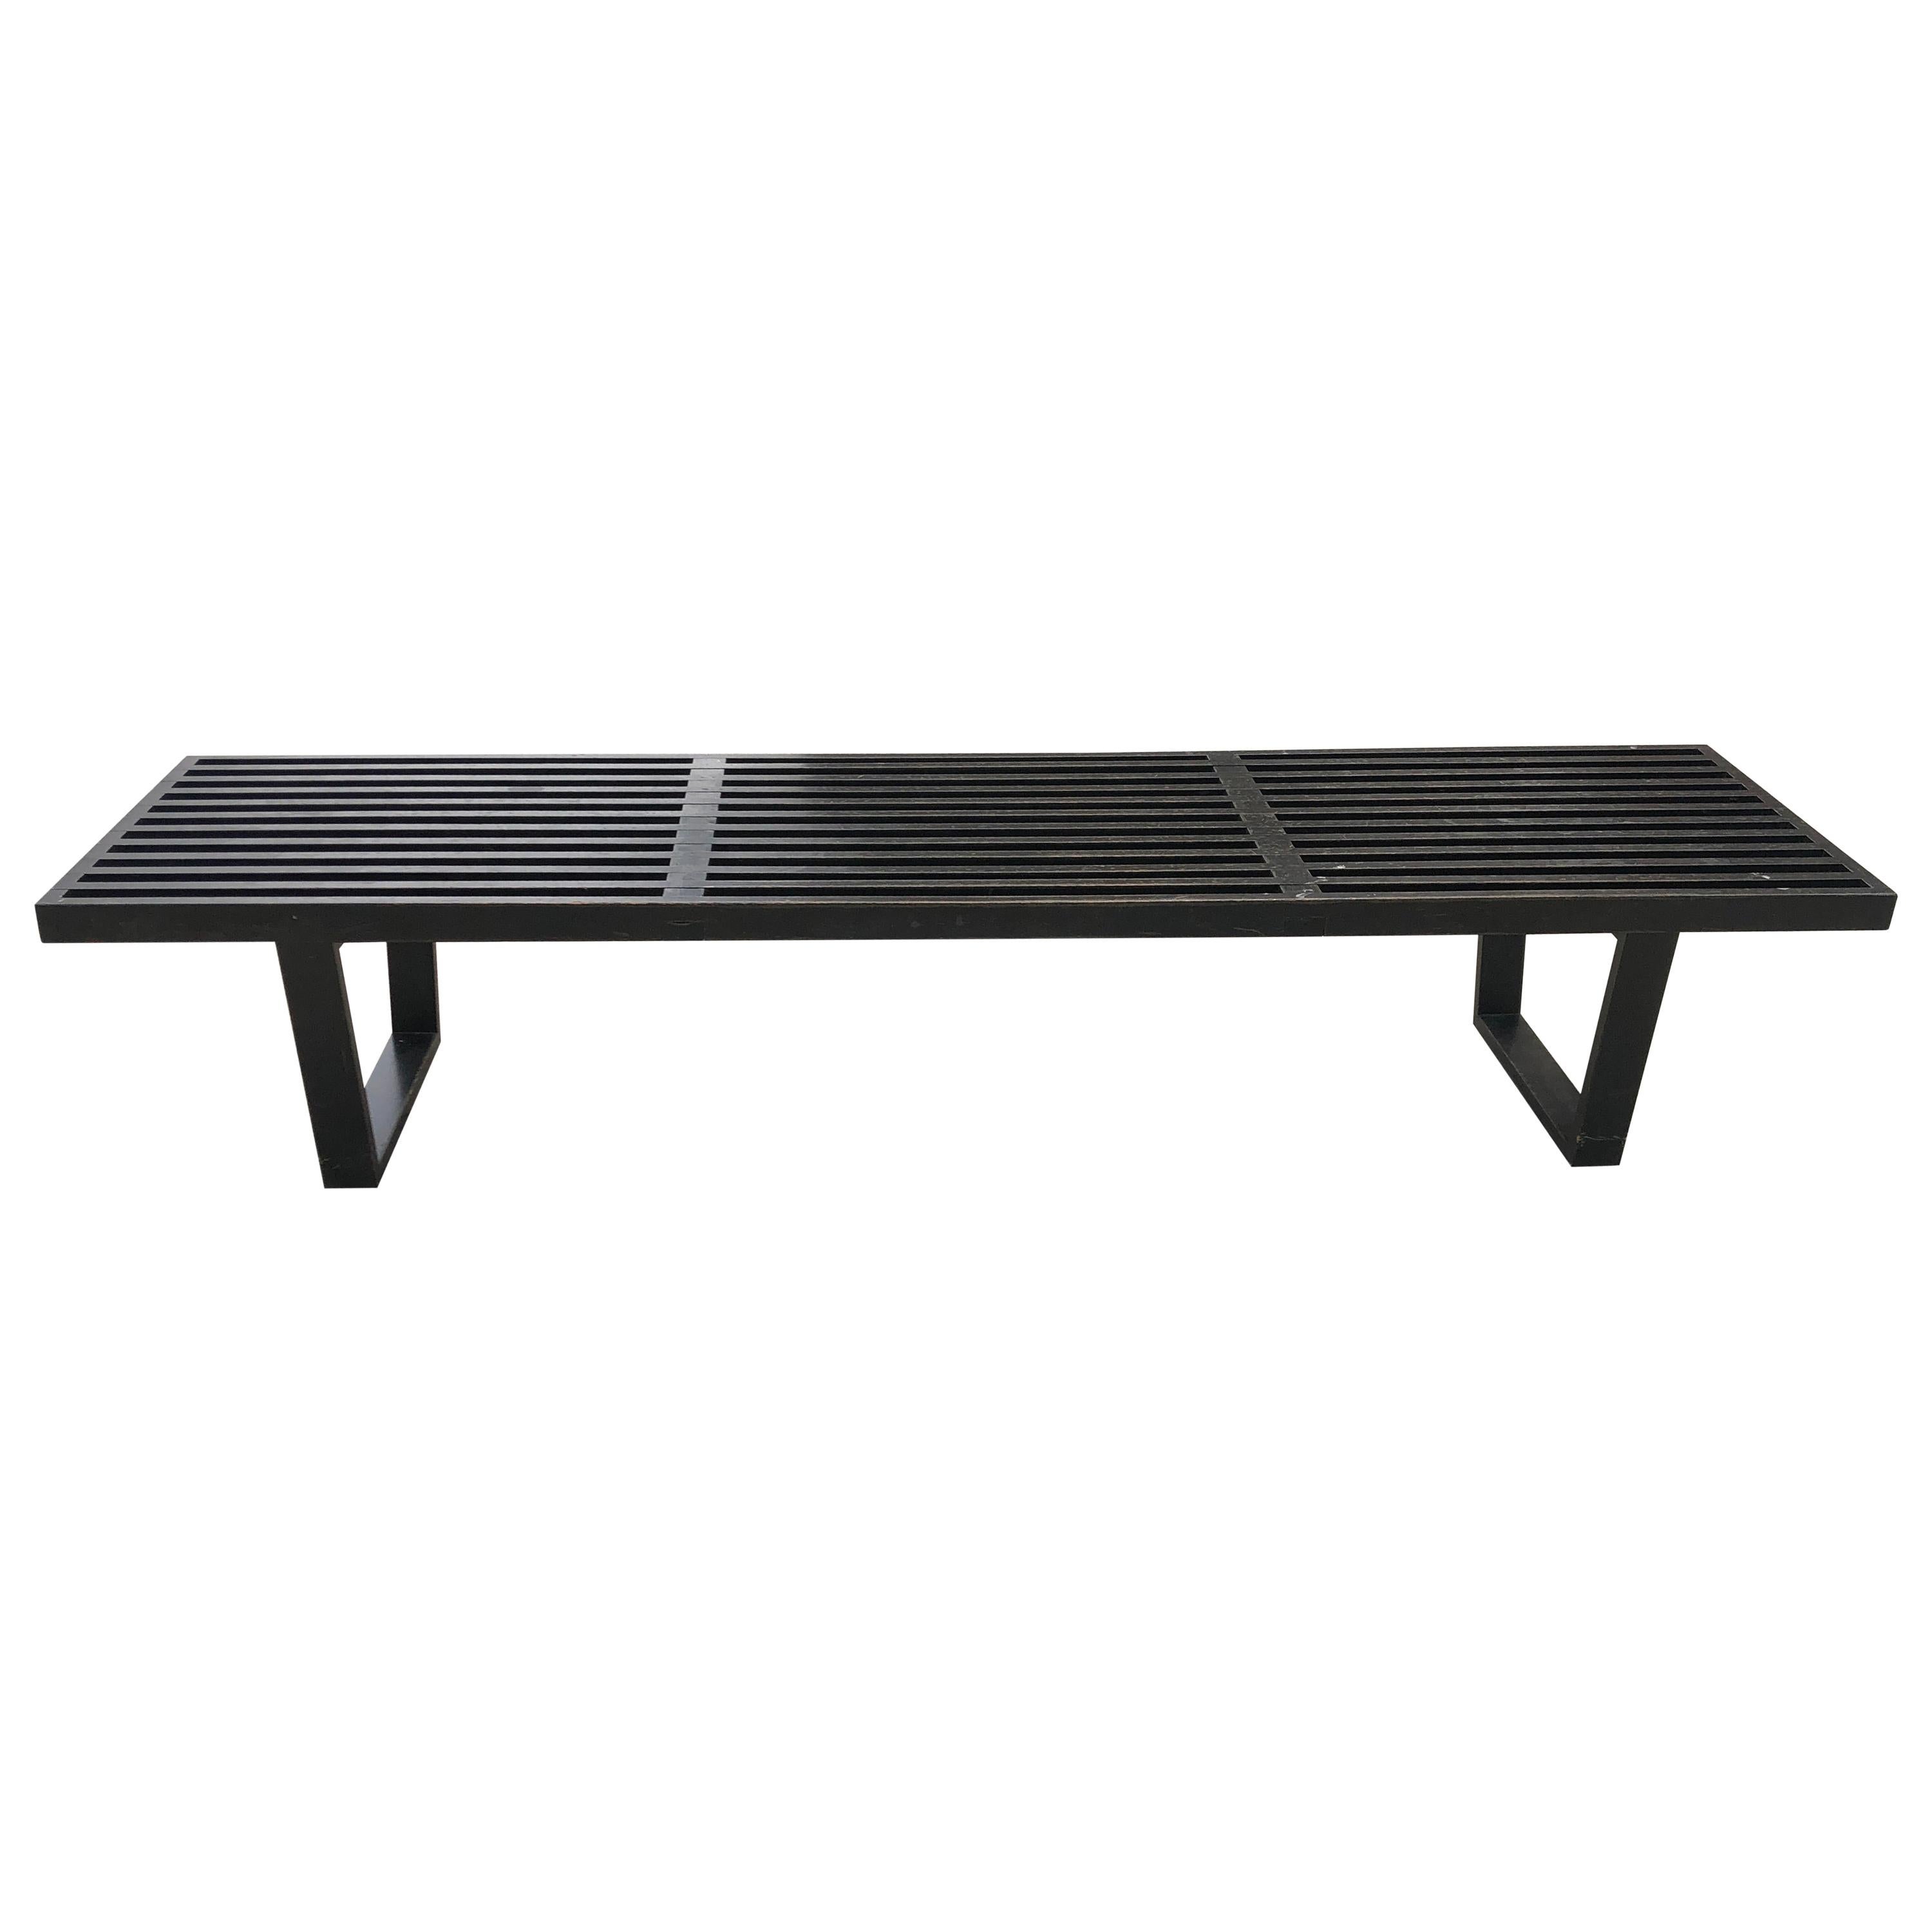 George Nelson Ebony Slat Bench or Coffee Table For Sale